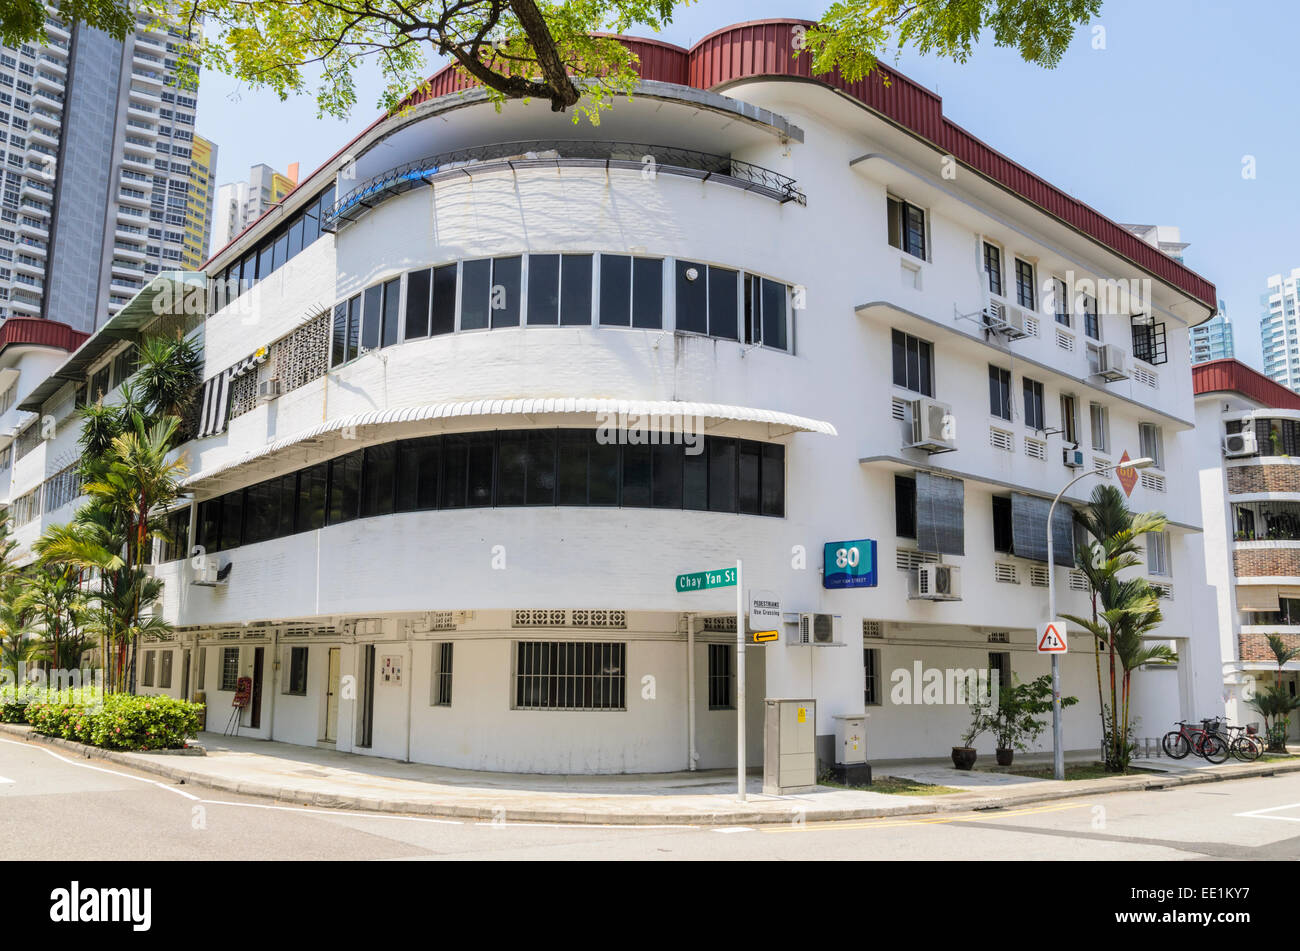 Streamline Moderne architectural style buildings in the Tiong Bahru Estate, Singapore Stock Photo